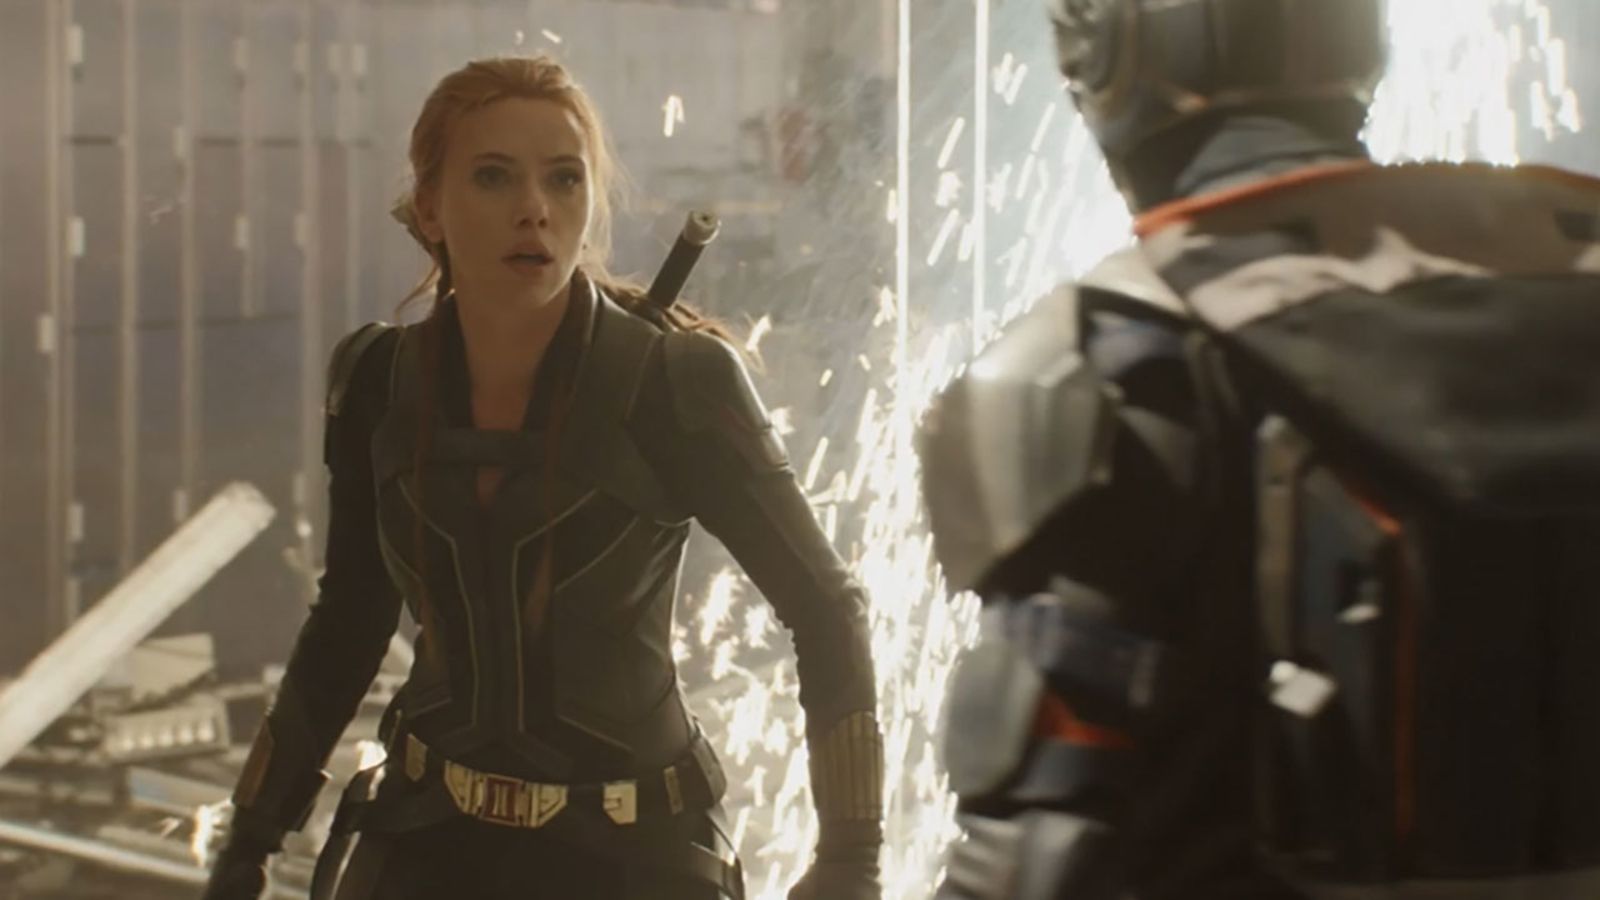 Final 'Black Widow' trailer released: Check out the trailer for 24th Marvel Cinematic Universe film